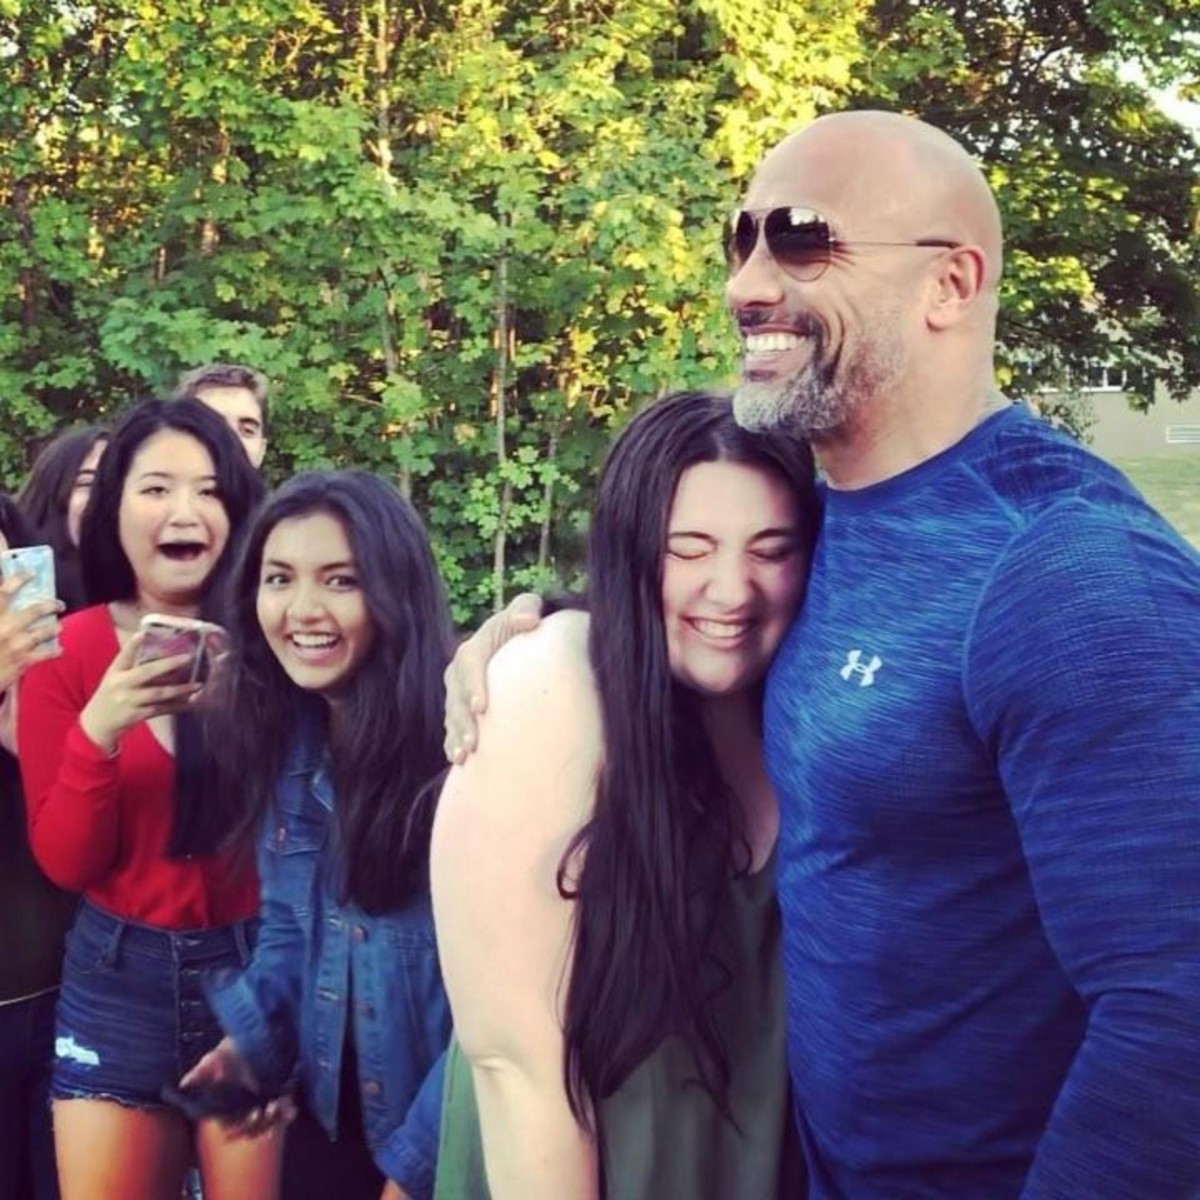 Dwayne Johnson (/ 28.09.2017): "Tears and all. Bottom line, Im a grateful and lucky SOB to have the greatest fans on earth. Time is my most valued currency these days and Im always on the go, so I appreciate these students (or anyone for that matter) taking time out of their busy lives to wait patiently for hours while I finished up our #SkyscraperMovie production on the campus of University of British Columbia. I just love my guy in the back of the group jumping up and down like he just slammed a Rock size amount of caffeine and tequila. Good to meet yall. Keep working hard in school and dont be like Uncle DJ and get placed on academic probation after his first semester in college. #UBCLuv #GratefulMan ***editors note: for the record, Uncle DJ bounced back and became Academic Captain two years later of our beloved Miami Hurricane football team. Supplied by Instagram.com/face to face